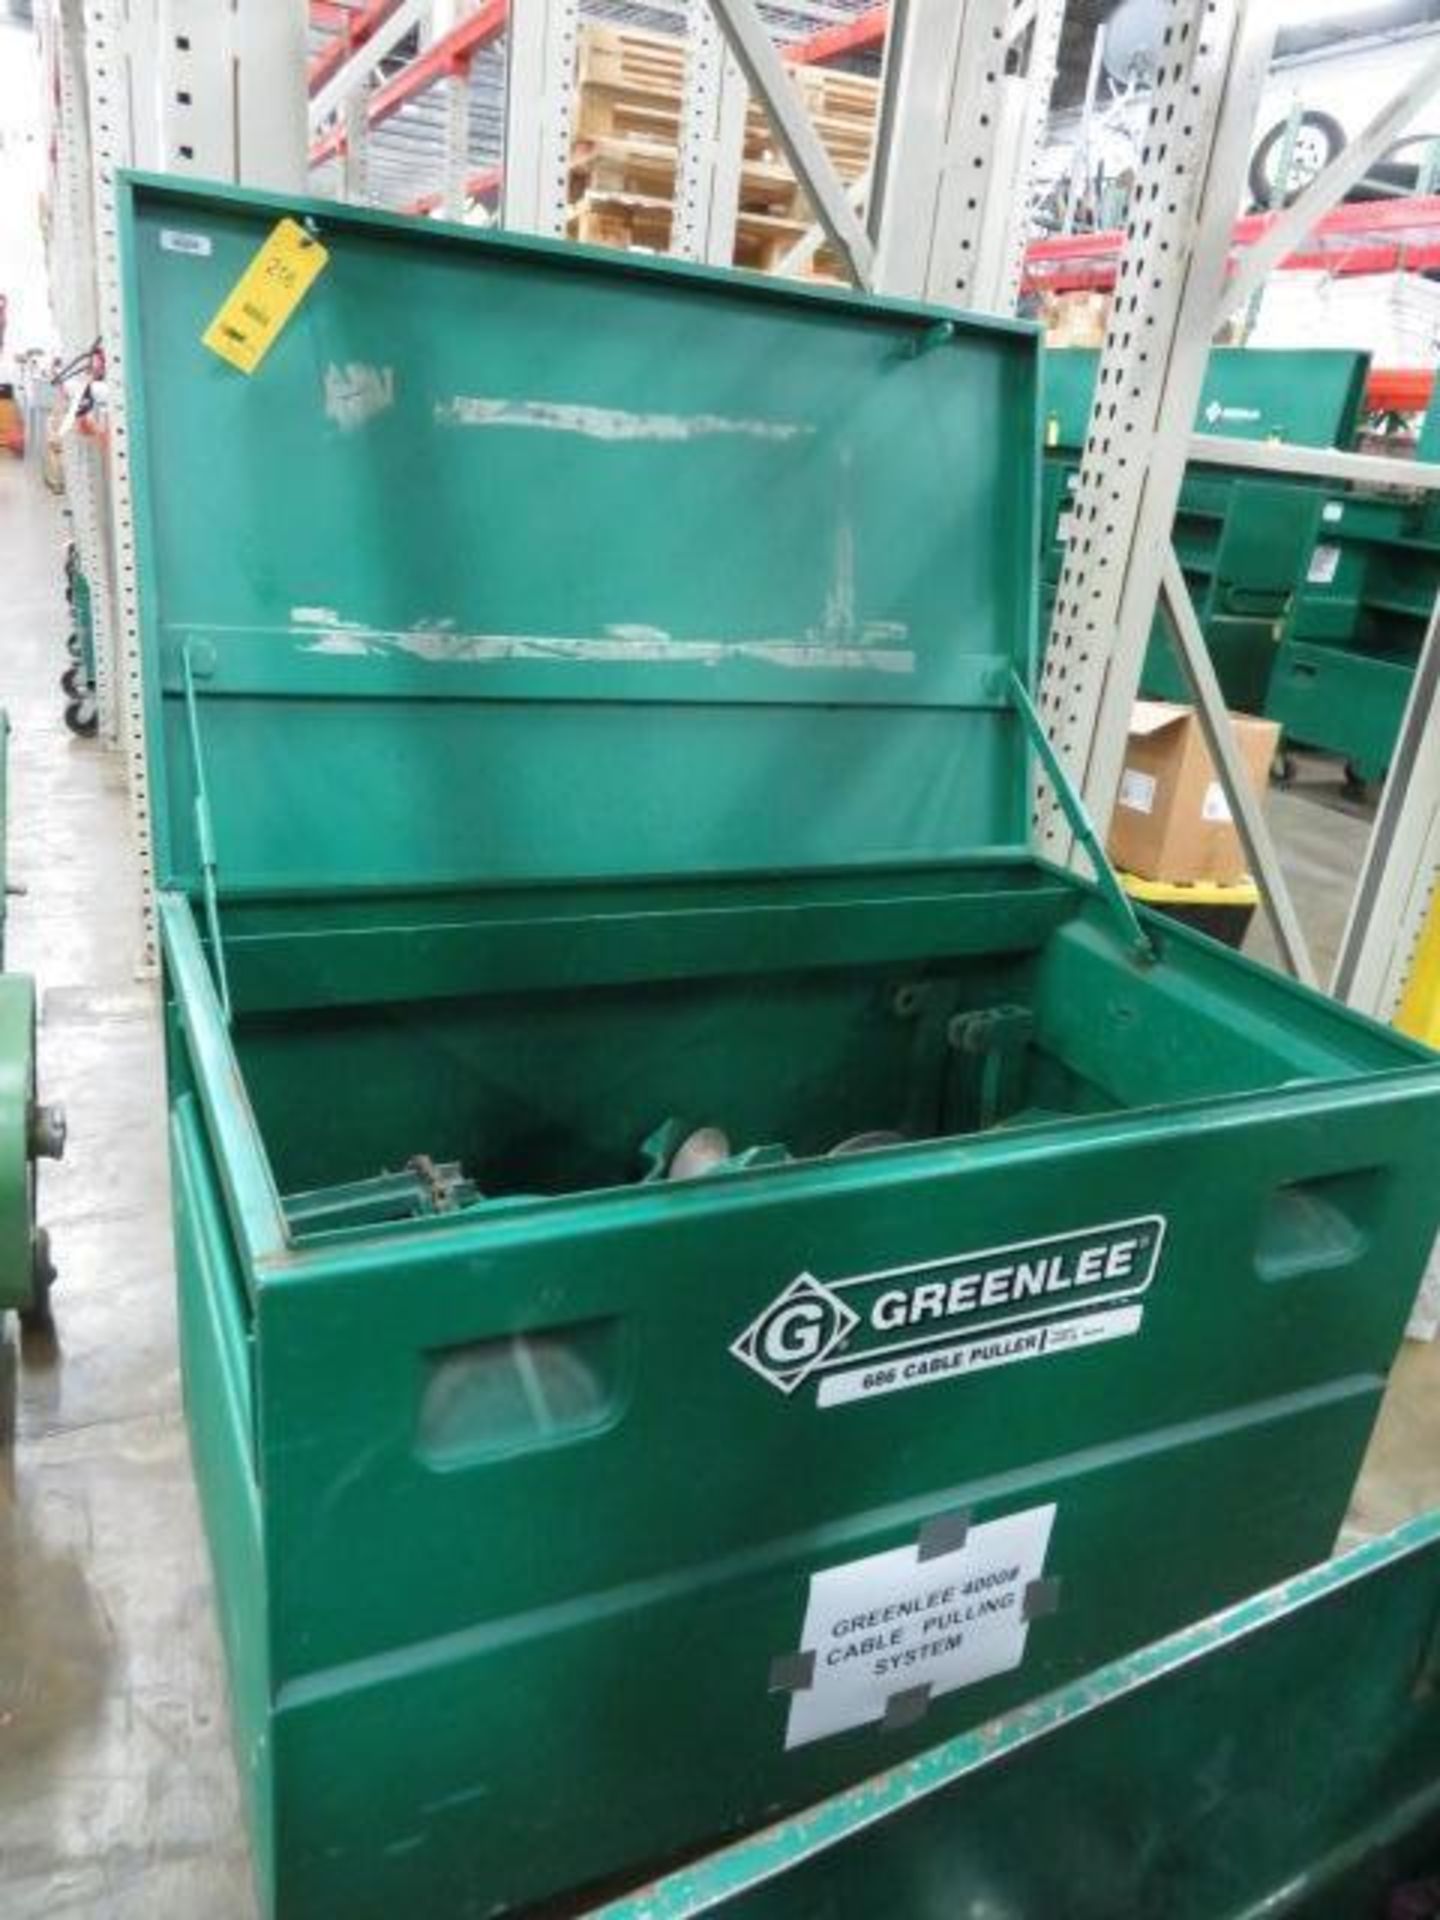 LOT: Greenlee 4000 lb. Hydraulic Cable Pulling System No. 686, with Portable Case - Image 2 of 3